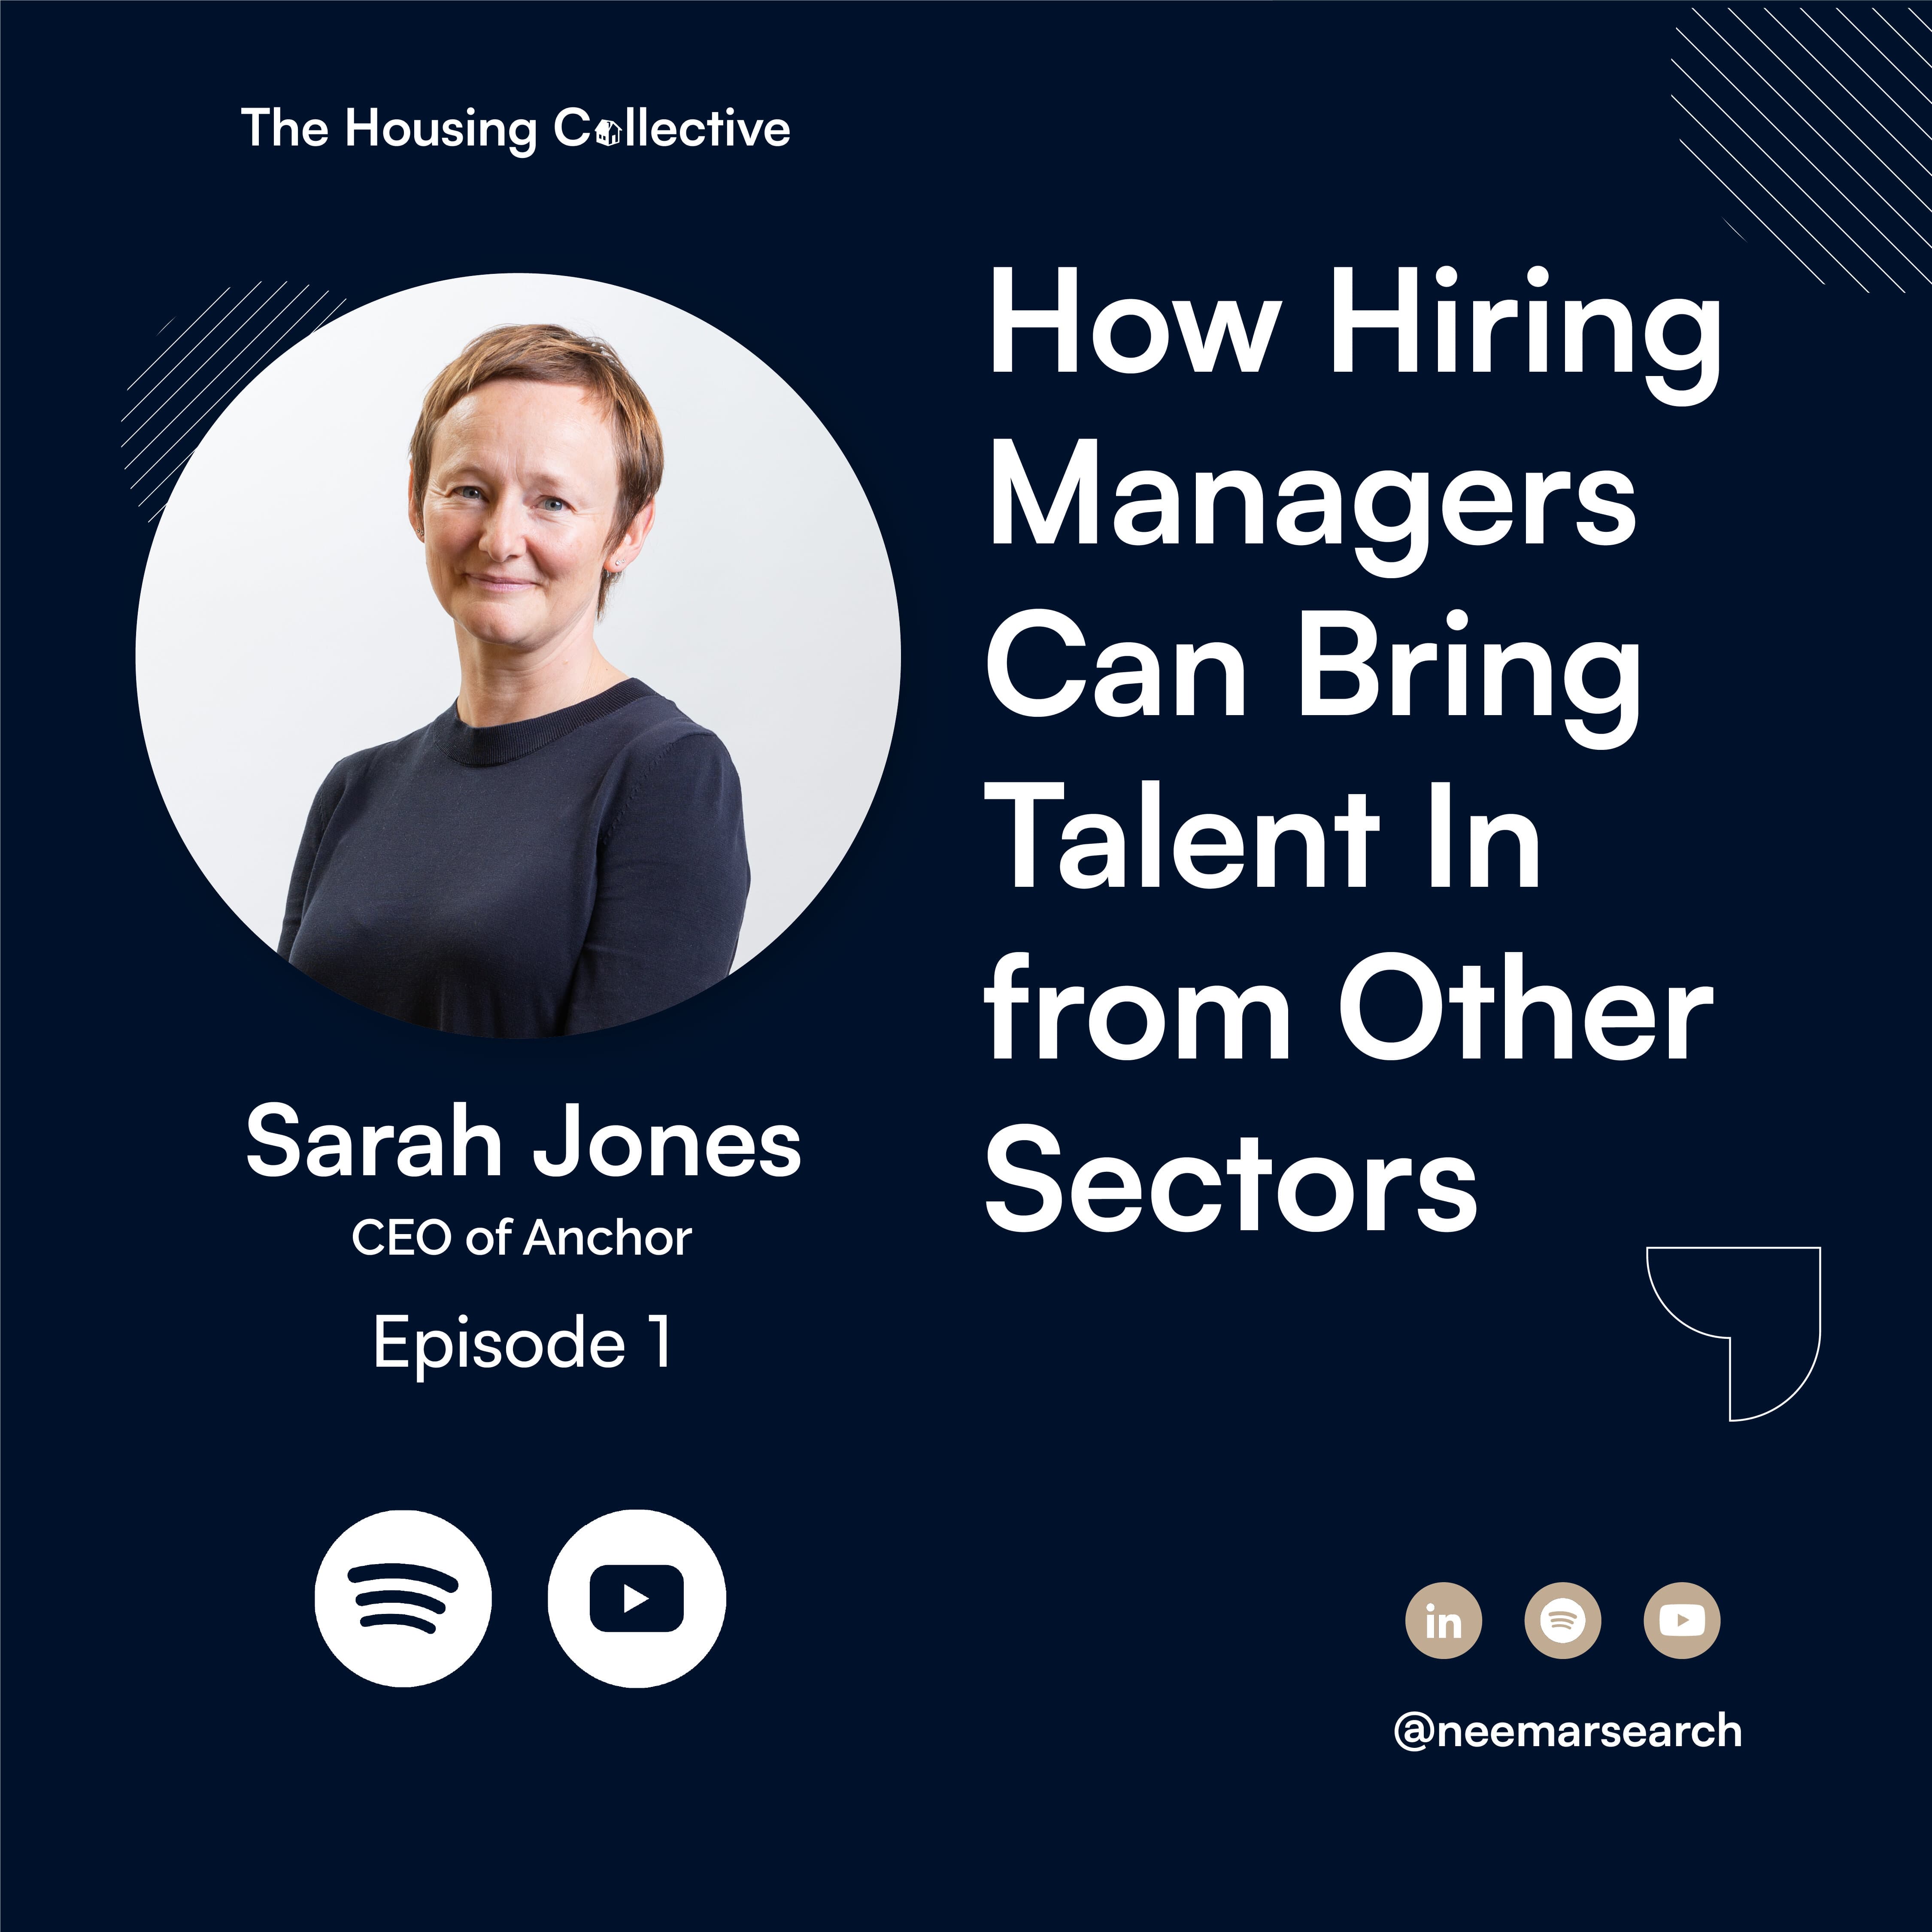 The Housing Collective: How Hiring Managers Can Bring Talent In from Other Sectors